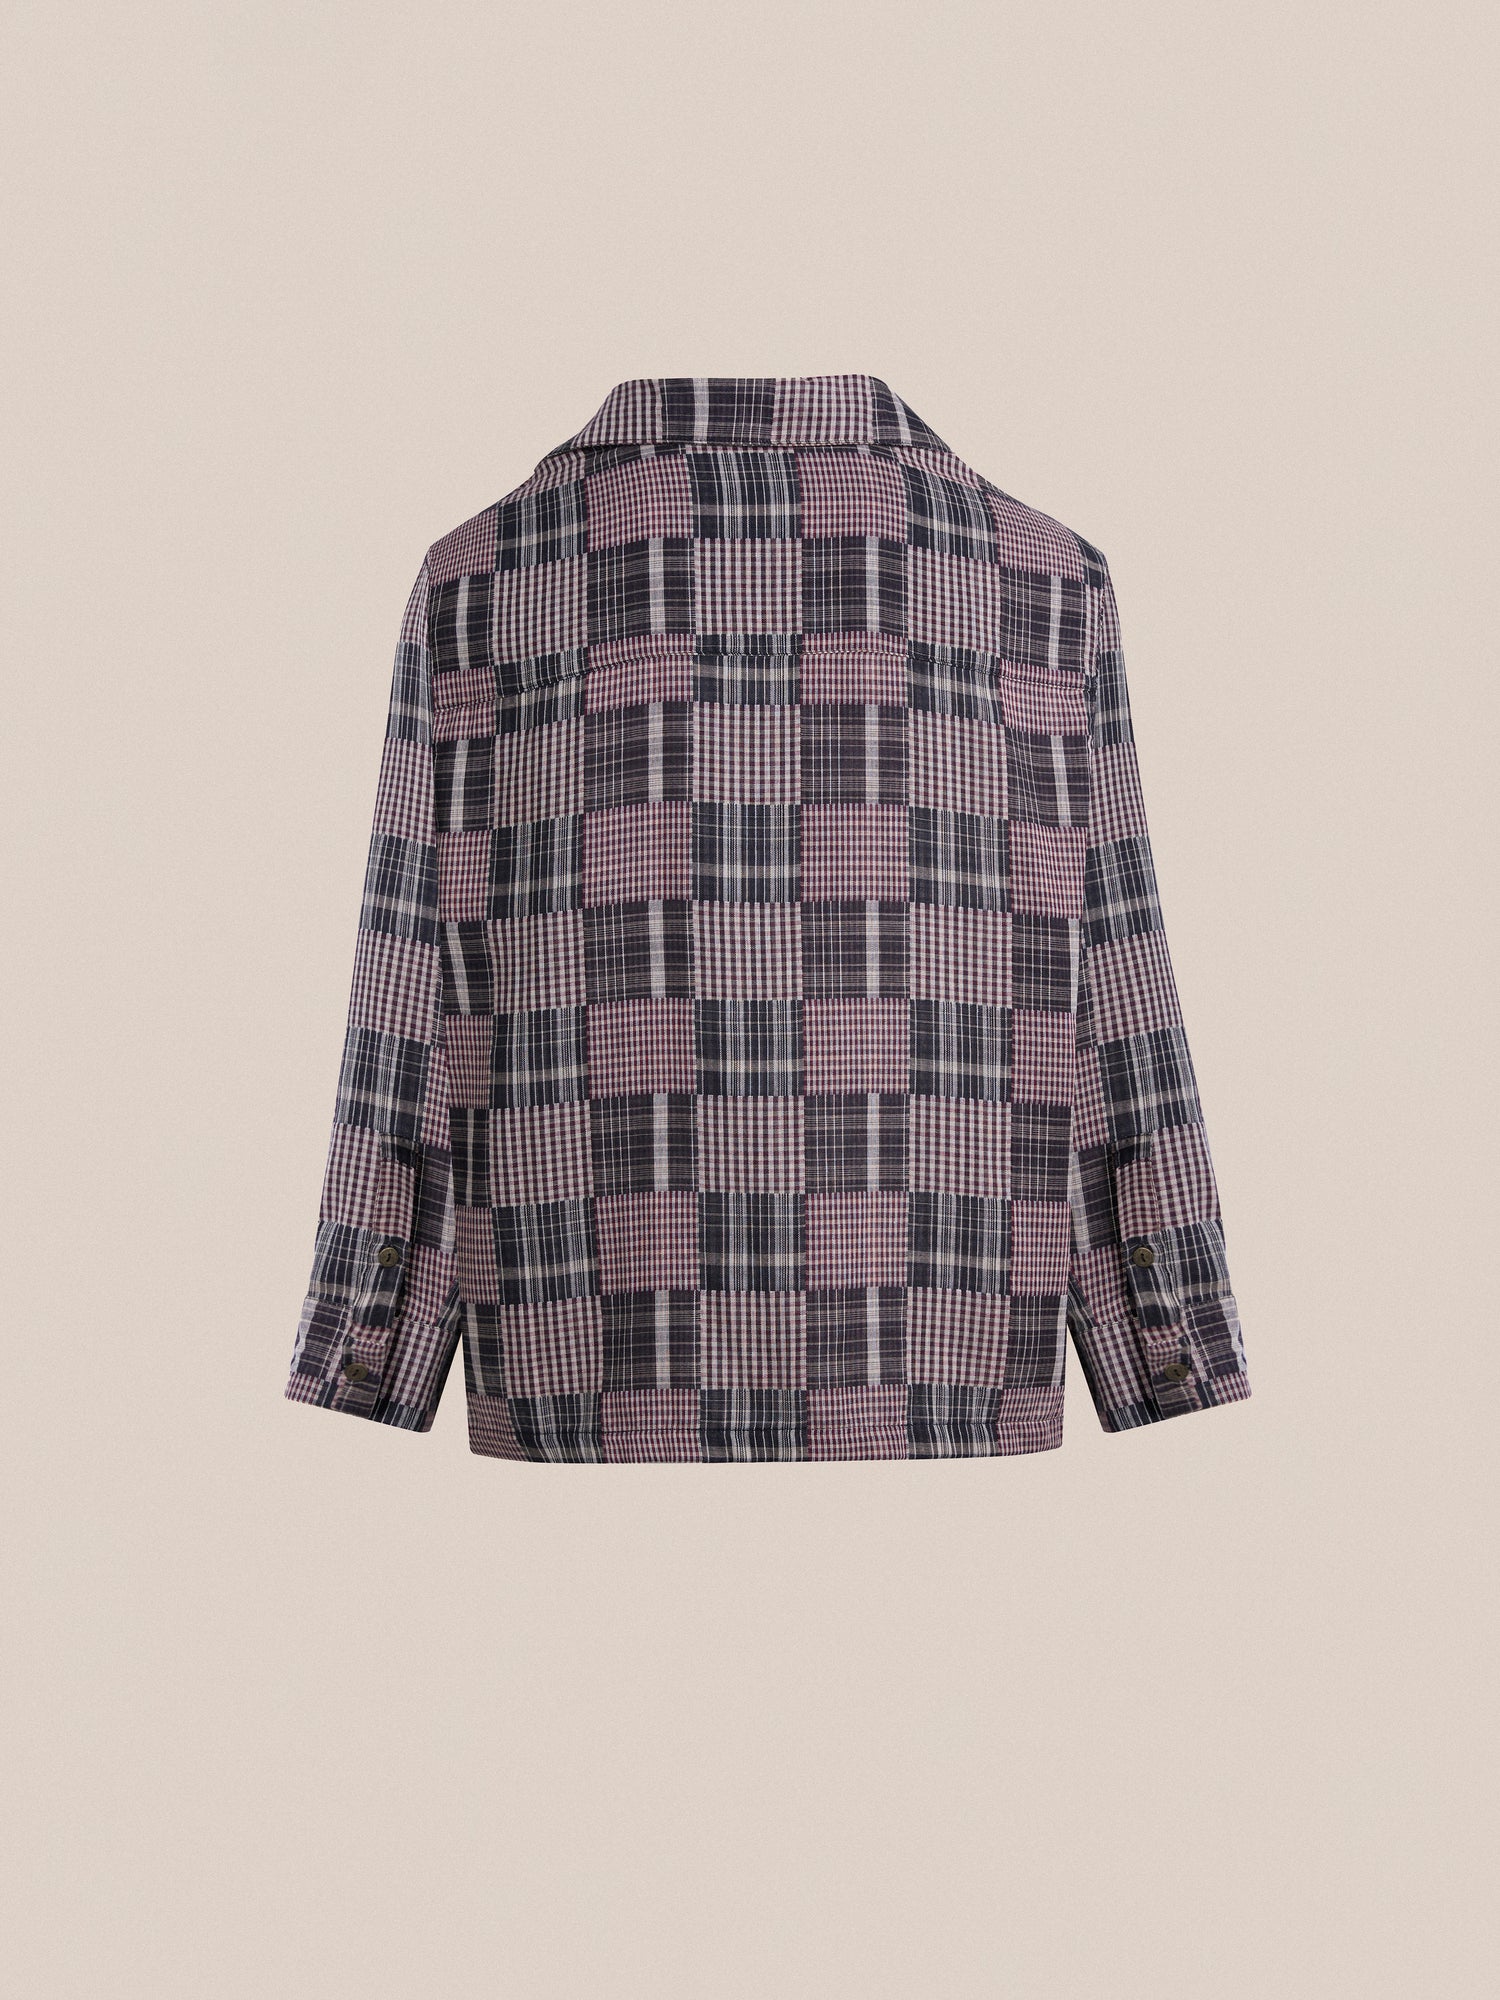 The back view of a timeless silhouette Found Multi-Flannel LS Camp Shirt in pink and black.